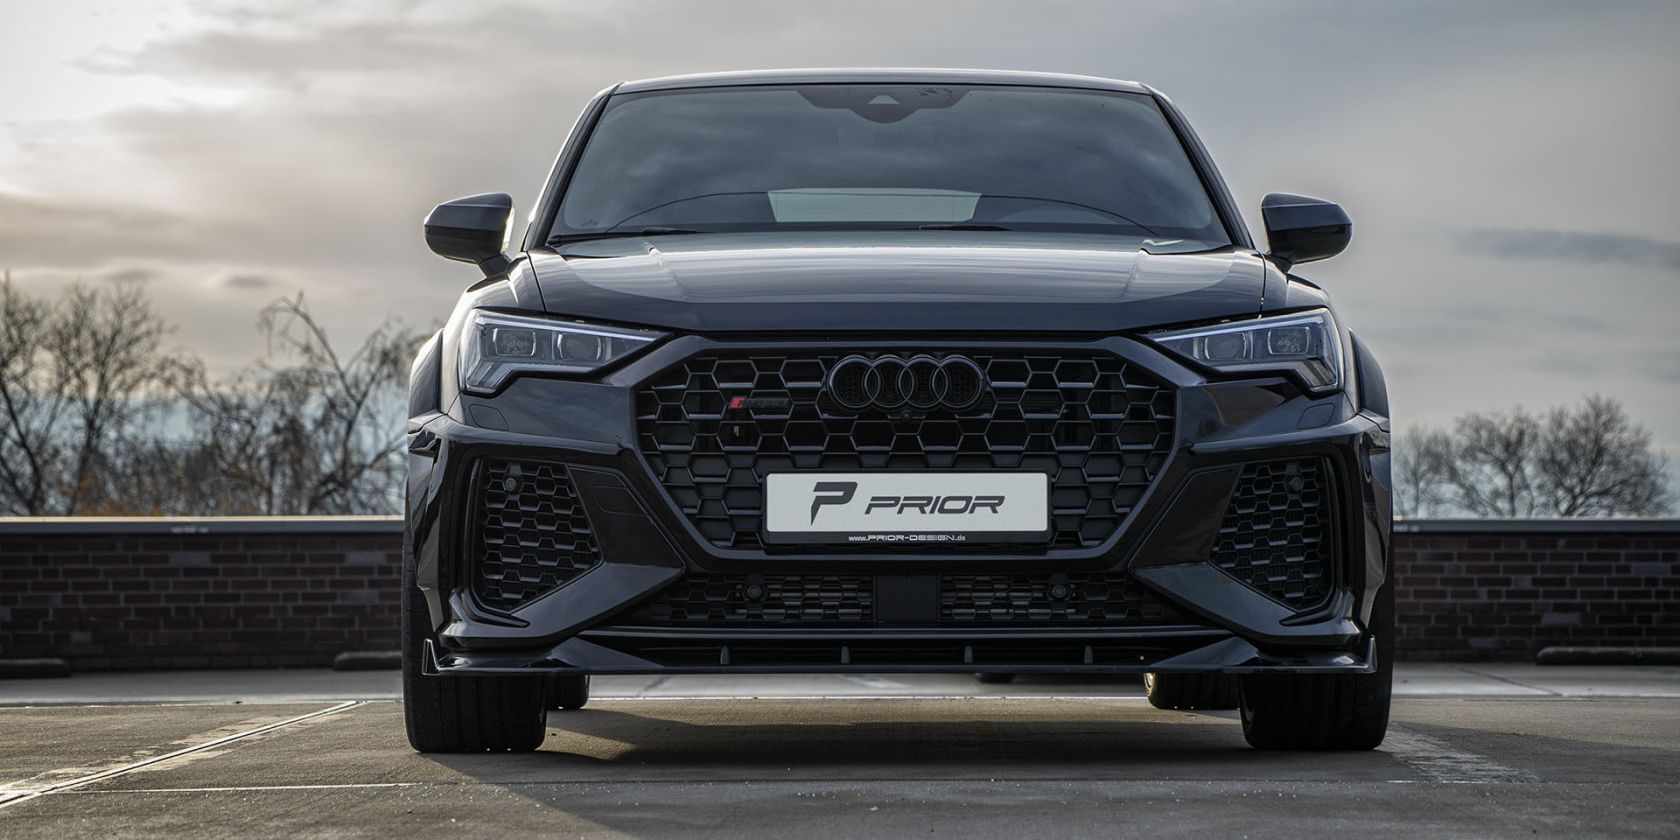 PD Widebody Front Spoiler Lip for Audi RSQ3 [2019+]